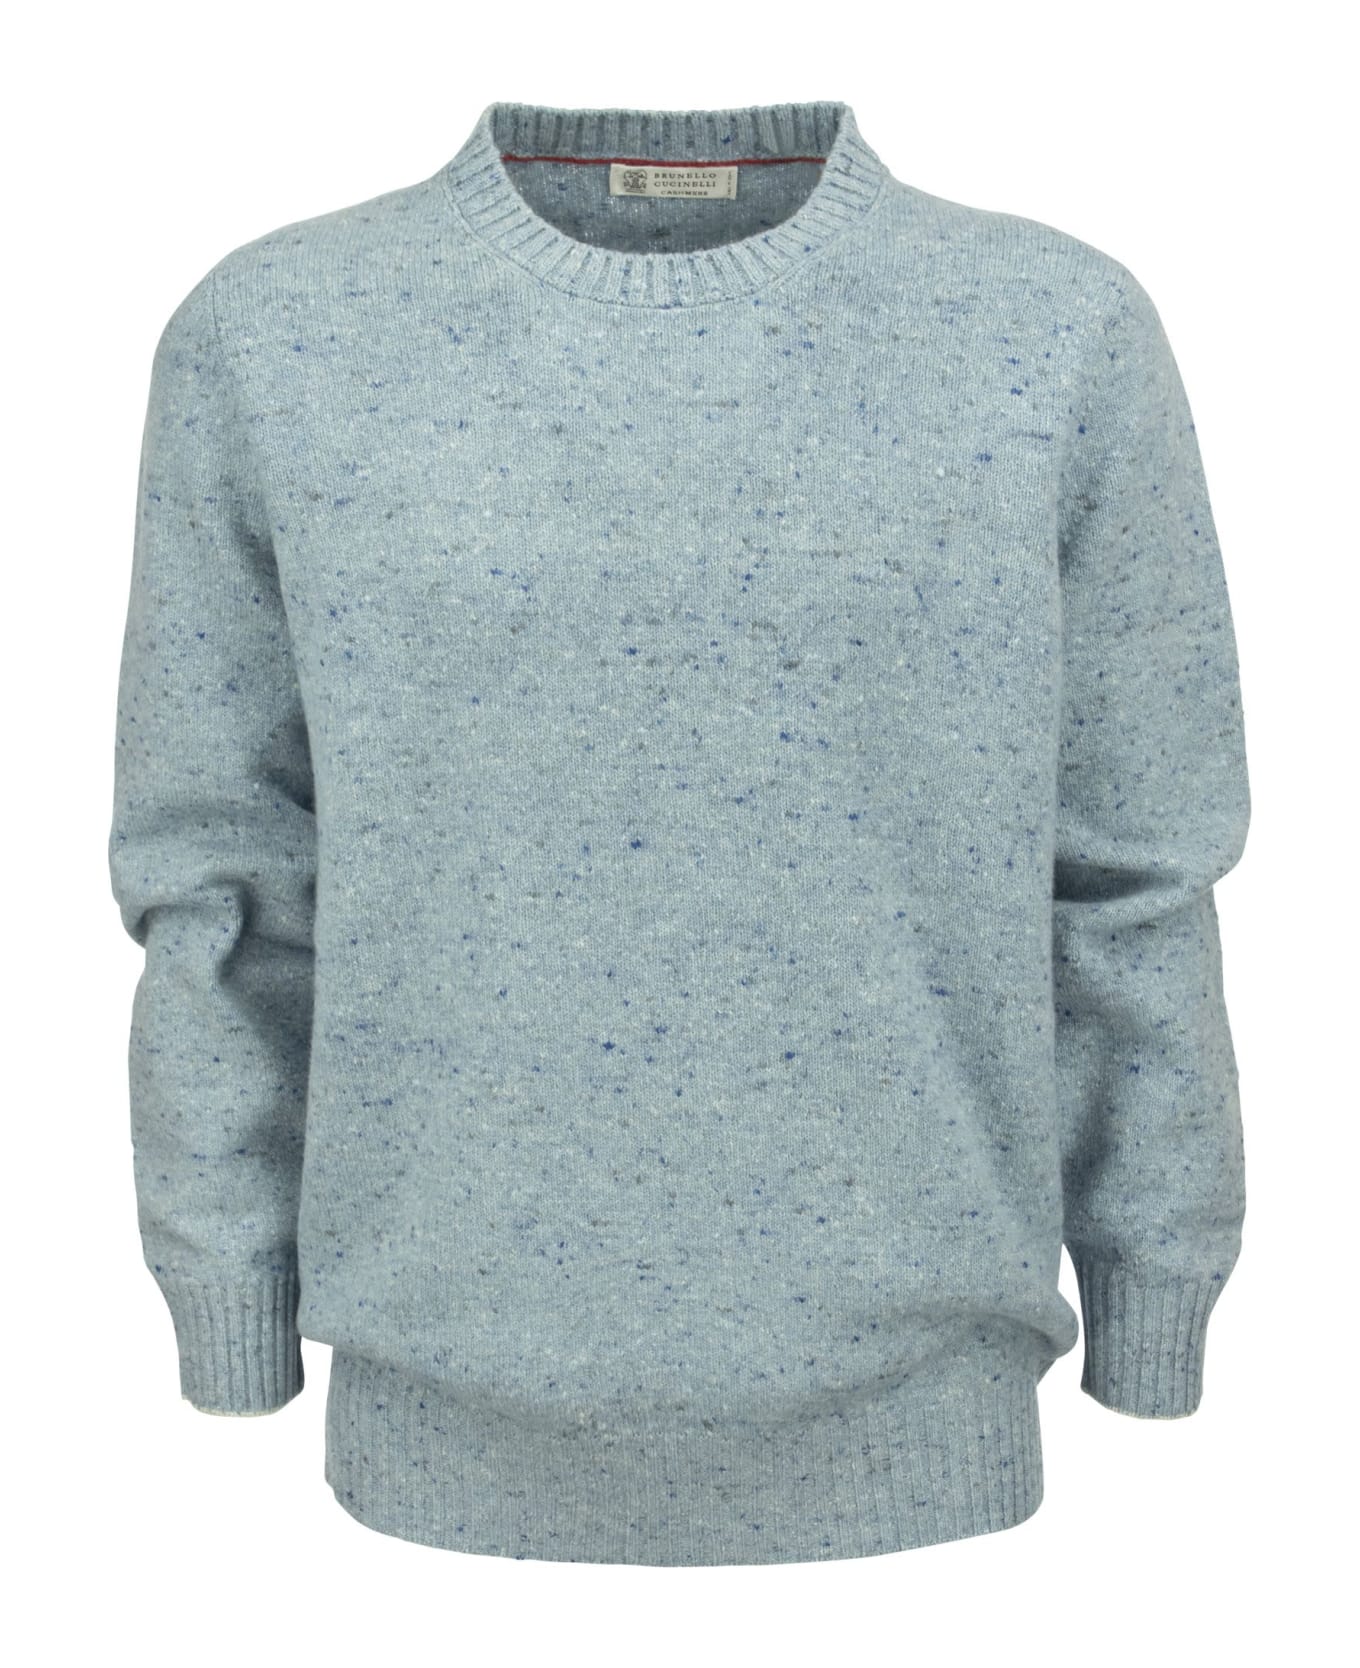 Brunello Cucinelli Crew-neck Sweater In Wool And Cashmere Mix - Light Blue ニットウェア